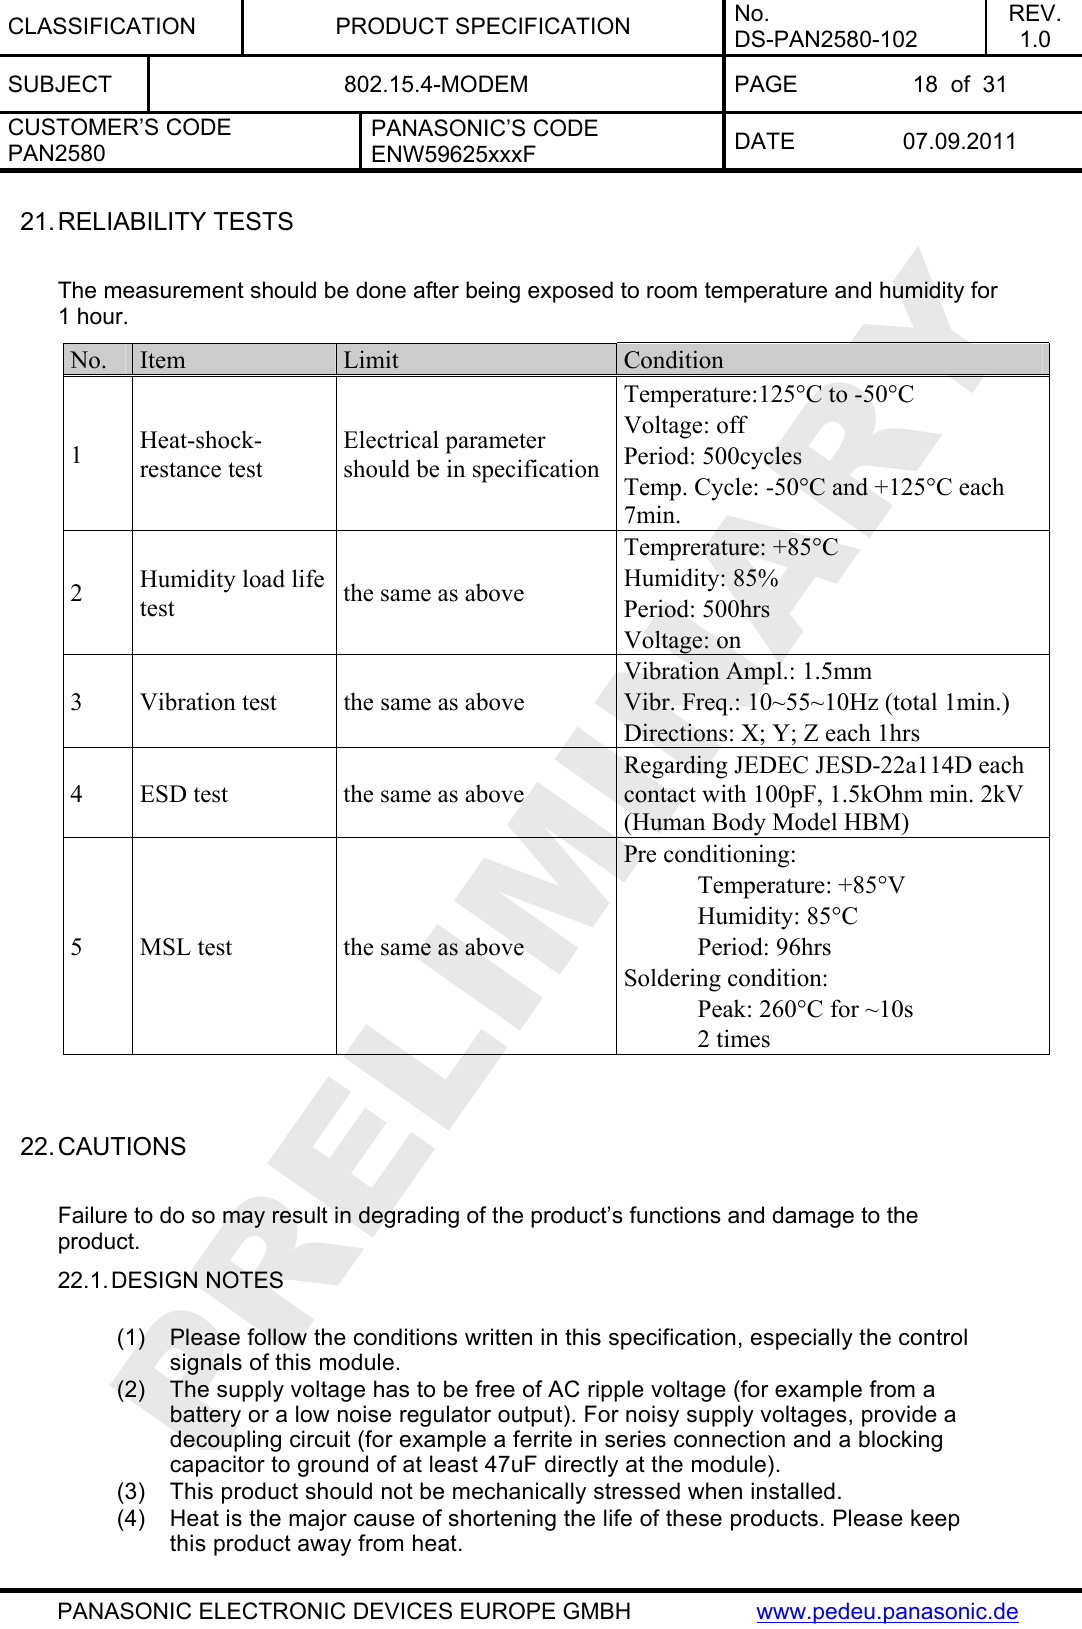 CLASSIFICATION PRODUCT SPECIFICATION No. DS-PAN2580-102 REV. 1.0 SUBJECT  802.15.4-MODEM  PAGE  18  of  31 CUSTOMER’S CODE PAN2580 PANASONIC’S CODE ENW59625xxxF  DATE 07.09.2011   PANASONIC ELECTRONIC DEVICES EUROPE GMBH  www.pedeu.panasonic.de  21. RELIABILITY TESTS  The measurement should be done after being exposed to room temperature and humidity for 1 hour. No.  Item  Limit  Condition 1  Heat-shock-restance test  Electrical parameter should be in specification Temperature:125°C to -50°C Voltage: off Period: 500cycles Temp. Cycle: -50°C and +125°C each 7min. 2  Humidity load life test  the same as above Temprerature: +85°C Humidity: 85% Period: 500hrs Voltage: on 3  Vibration test  the same as above Vibration Ampl.: 1.5mm Vibr. Freq.: 10~55~10Hz (total 1min.) Directions: X; Y; Z each 1hrs 4  ESD test  the same as above Regarding JEDEC JESD-22a114D each contact with 100pF, 1.5kOhm min. 2kV (Human Body Model HBM) 5  MSL test  the same as above Pre conditioning:  Temperature: +85°V  Humidity: 85°C  Period: 96hrs Soldering condition:   Peak: 260°C for ~10s  2 times   22. CAUTIONS  Failure to do so may result in degrading of the product’s functions and damage to the product. 22.1. DESIGN NOTES  (1)  Please follow the conditions written in this specification, especially the control signals of this module. (2)  The supply voltage has to be free of AC ripple voltage (for example from a battery or a low noise regulator output). For noisy supply voltages, provide a decoupling circuit (for example a ferrite in series connection and a blocking capacitor to ground of at least 47uF directly at the module). (3)  This product should not be mechanically stressed when installed. (4)  Heat is the major cause of shortening the life of these products. Please keep this product away from heat. 